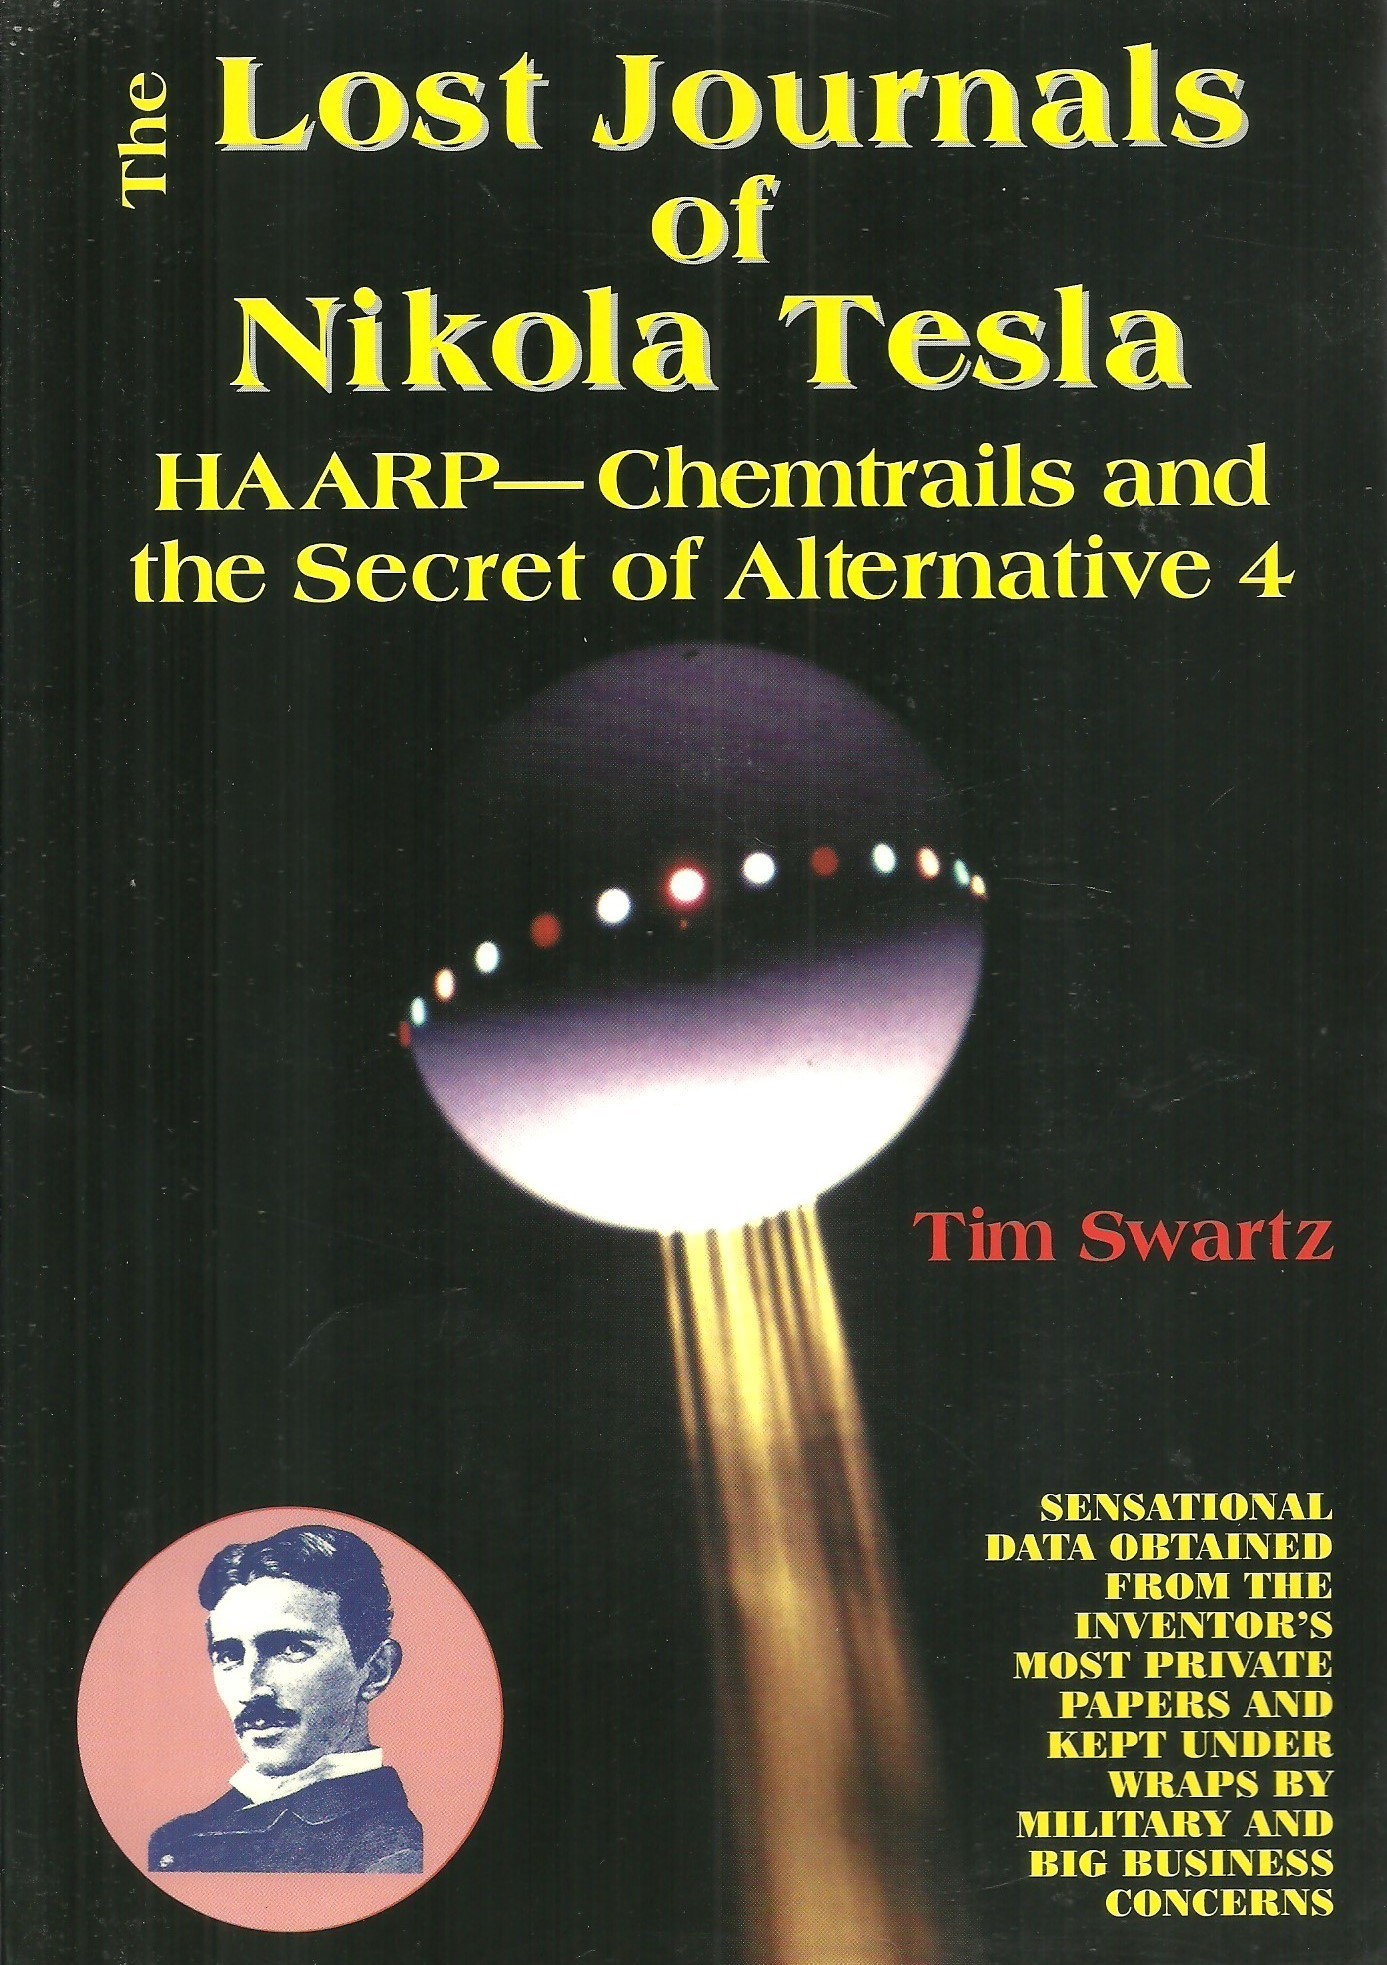 The Lost Journals of Nikola Tesla: Haarp - Chemtrails and the Secrets of Alternative 4